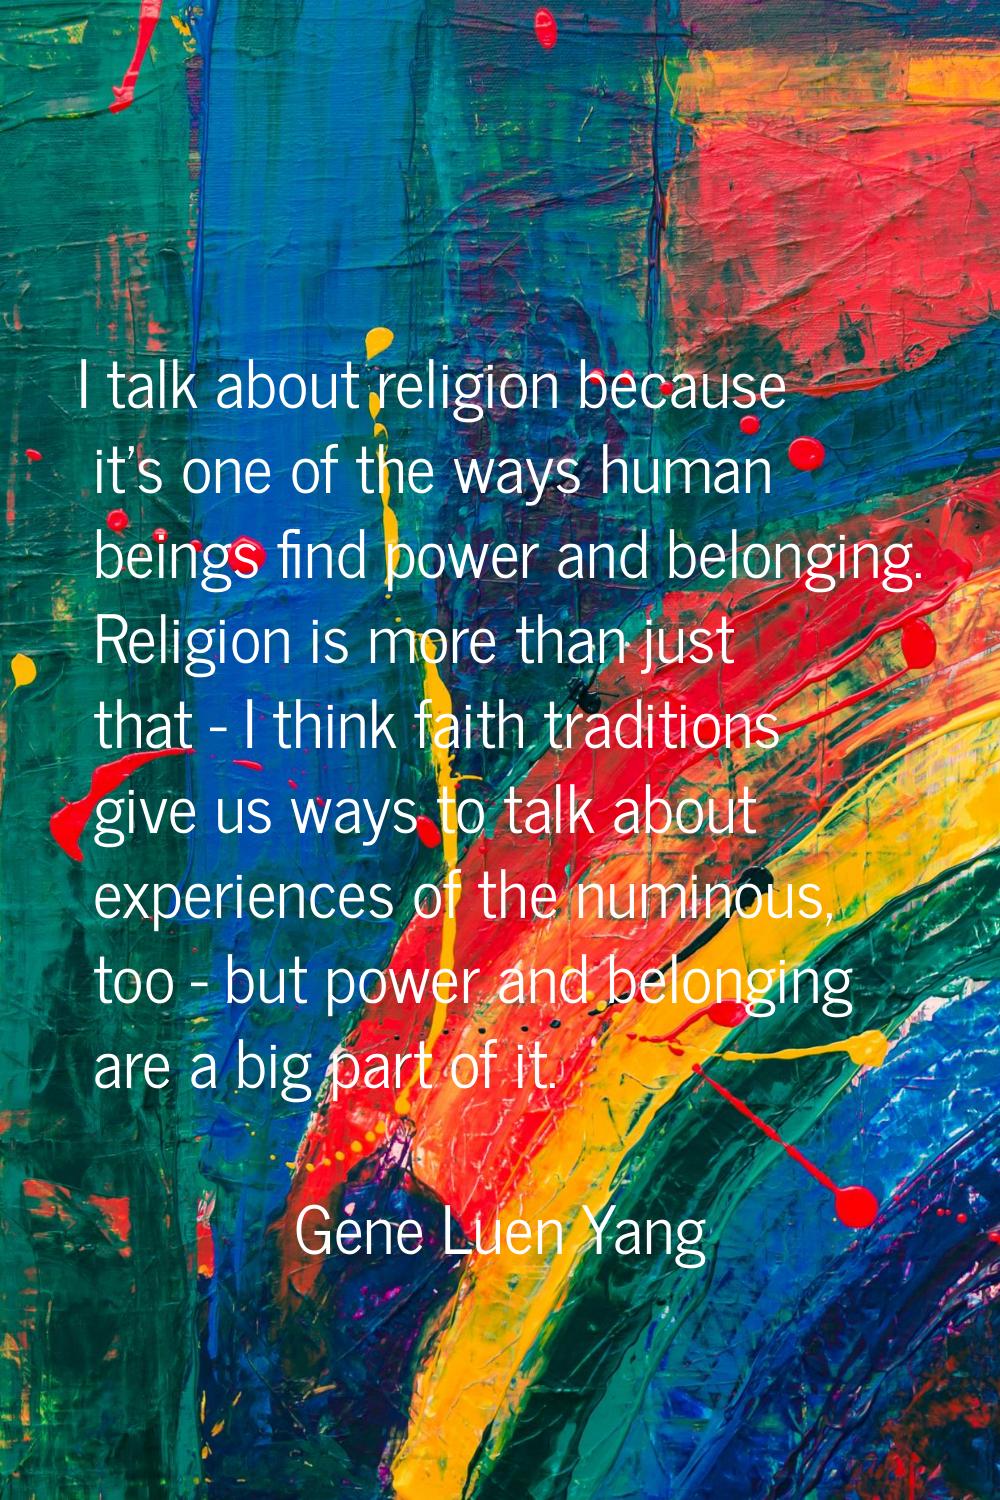 I talk about religion because it's one of the ways human beings find power and belonging. Religion 